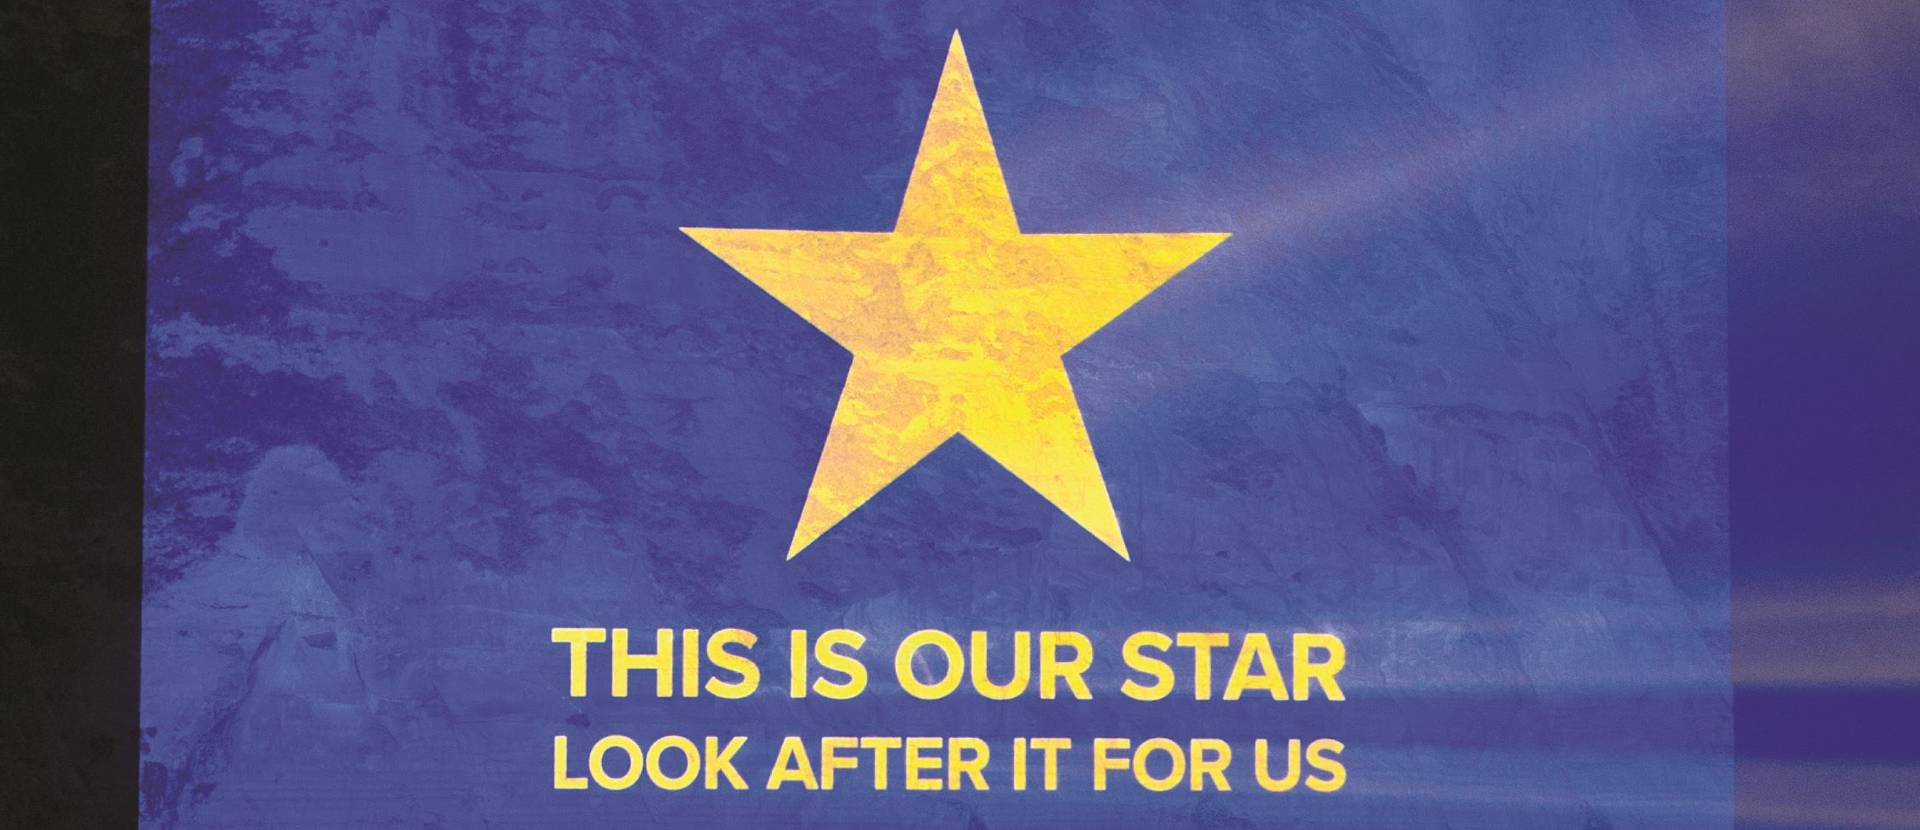 A gold star on a blue background above the text "This is our star, look after it for us".